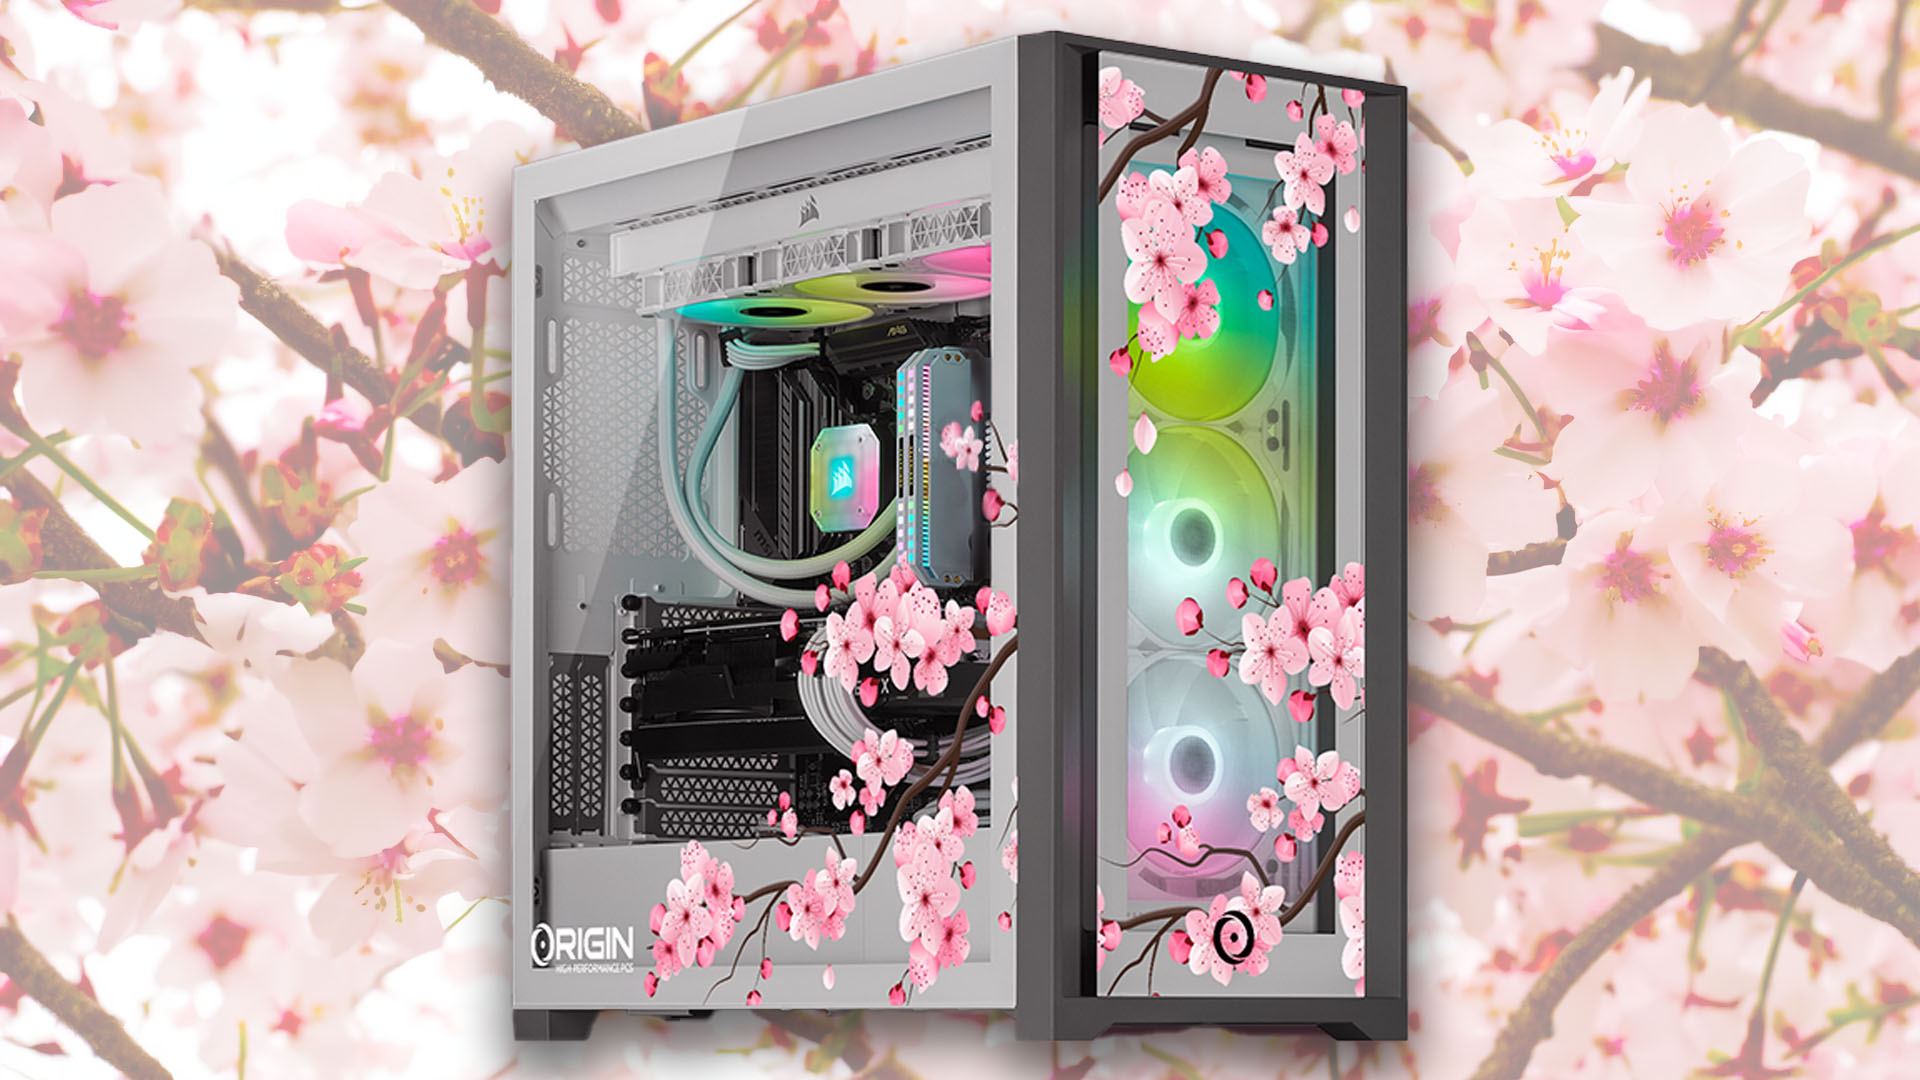 We love this cherry blossom gaming PC from Origin